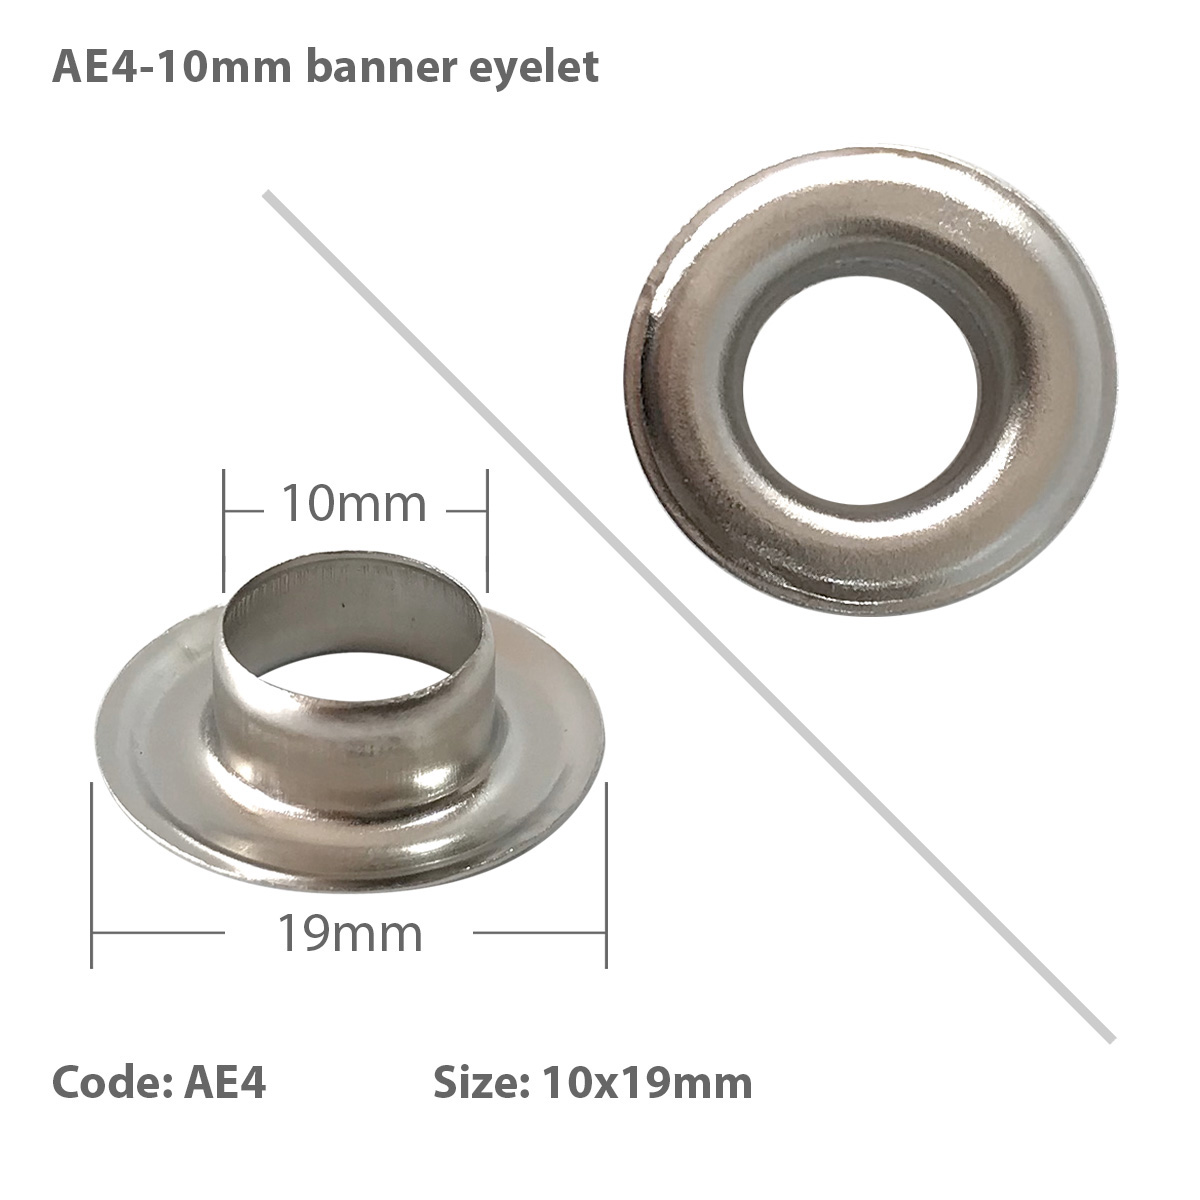 200 Stainless Steel Semi-Automatic Banner Eyelets for PVC Vinyl Printing 10 12mm 